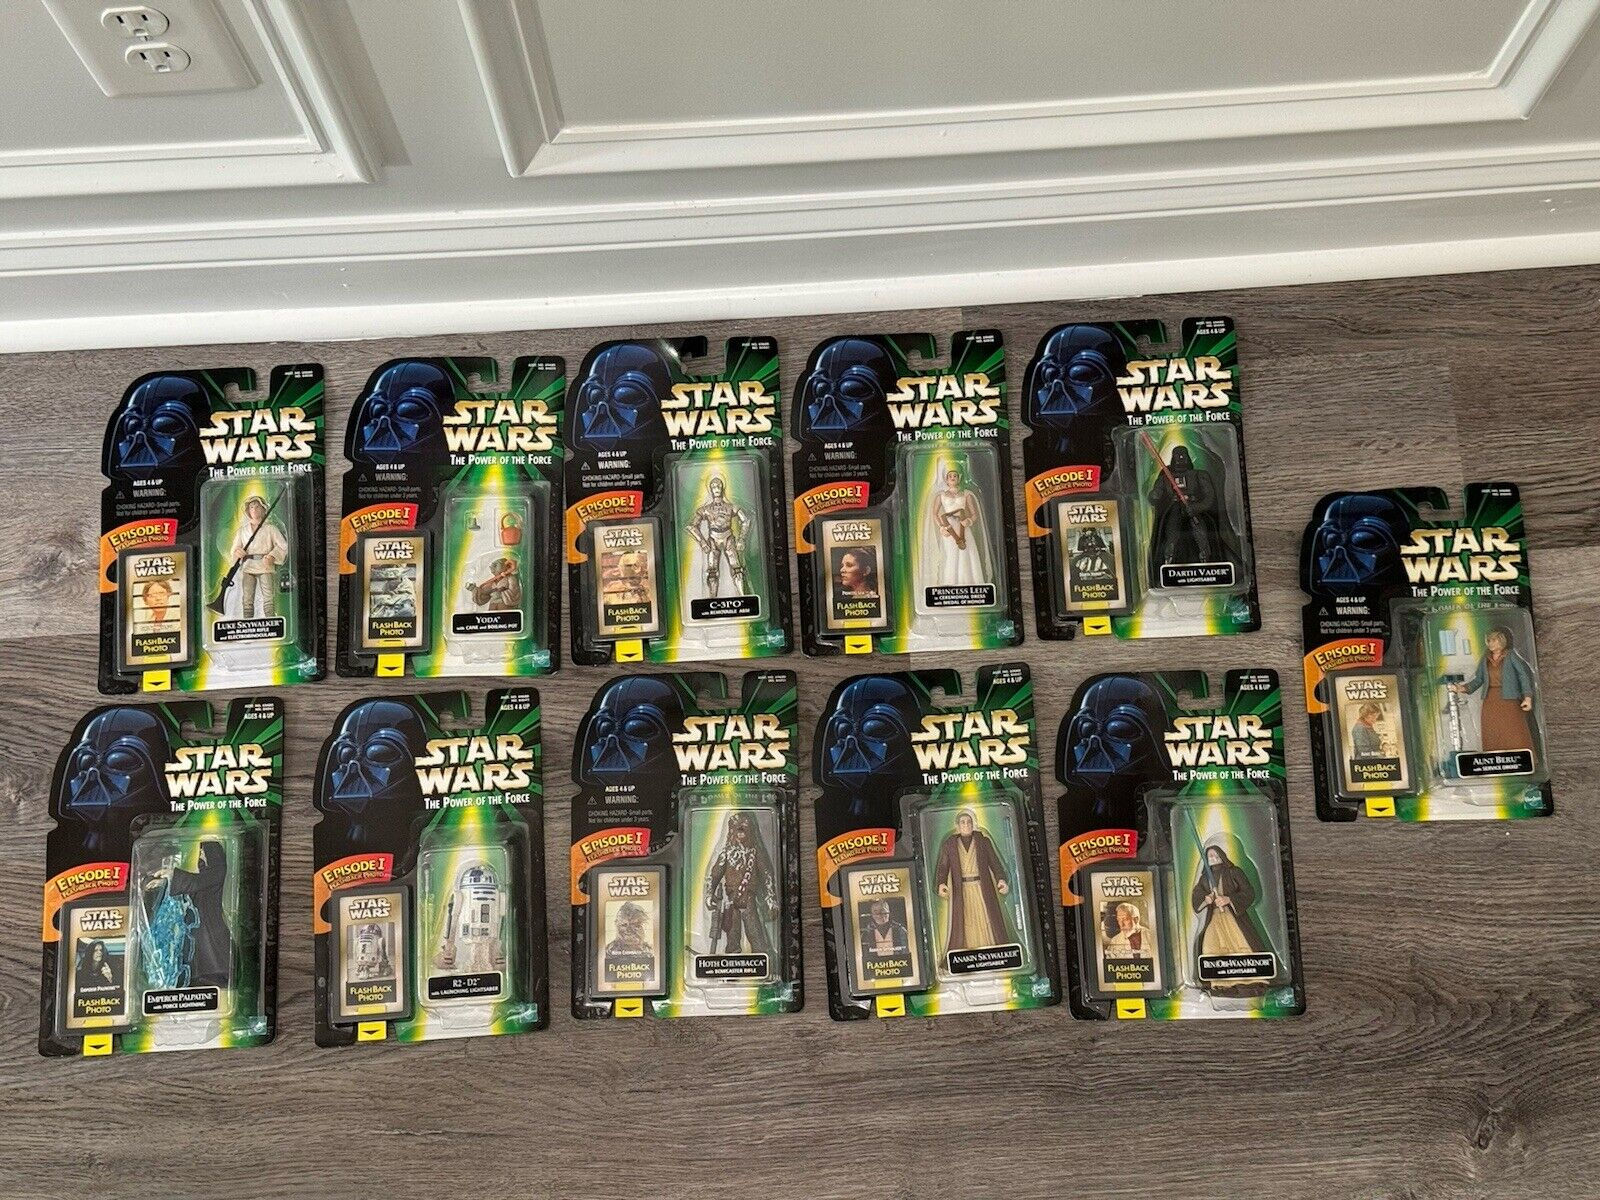 Star Wars Power Of The Force Flashback Photo 1998 Lot of 11 New R2-D2 C-3PO Luke